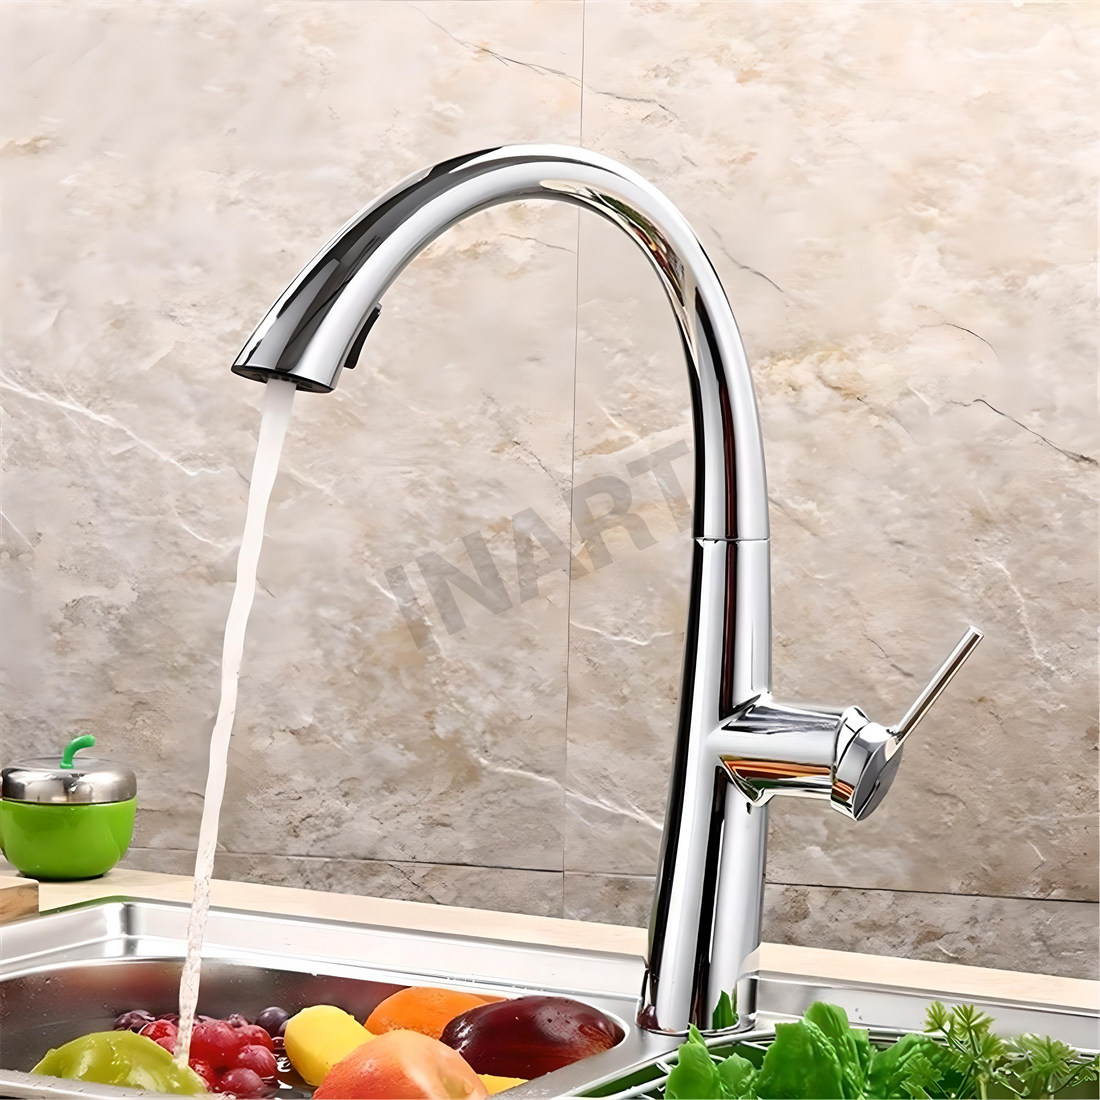 InArt Chrome High Arc Kitchen Faucet - Single Handle with 360 Swivel and Pull Down Sprayer - InArt-Studio